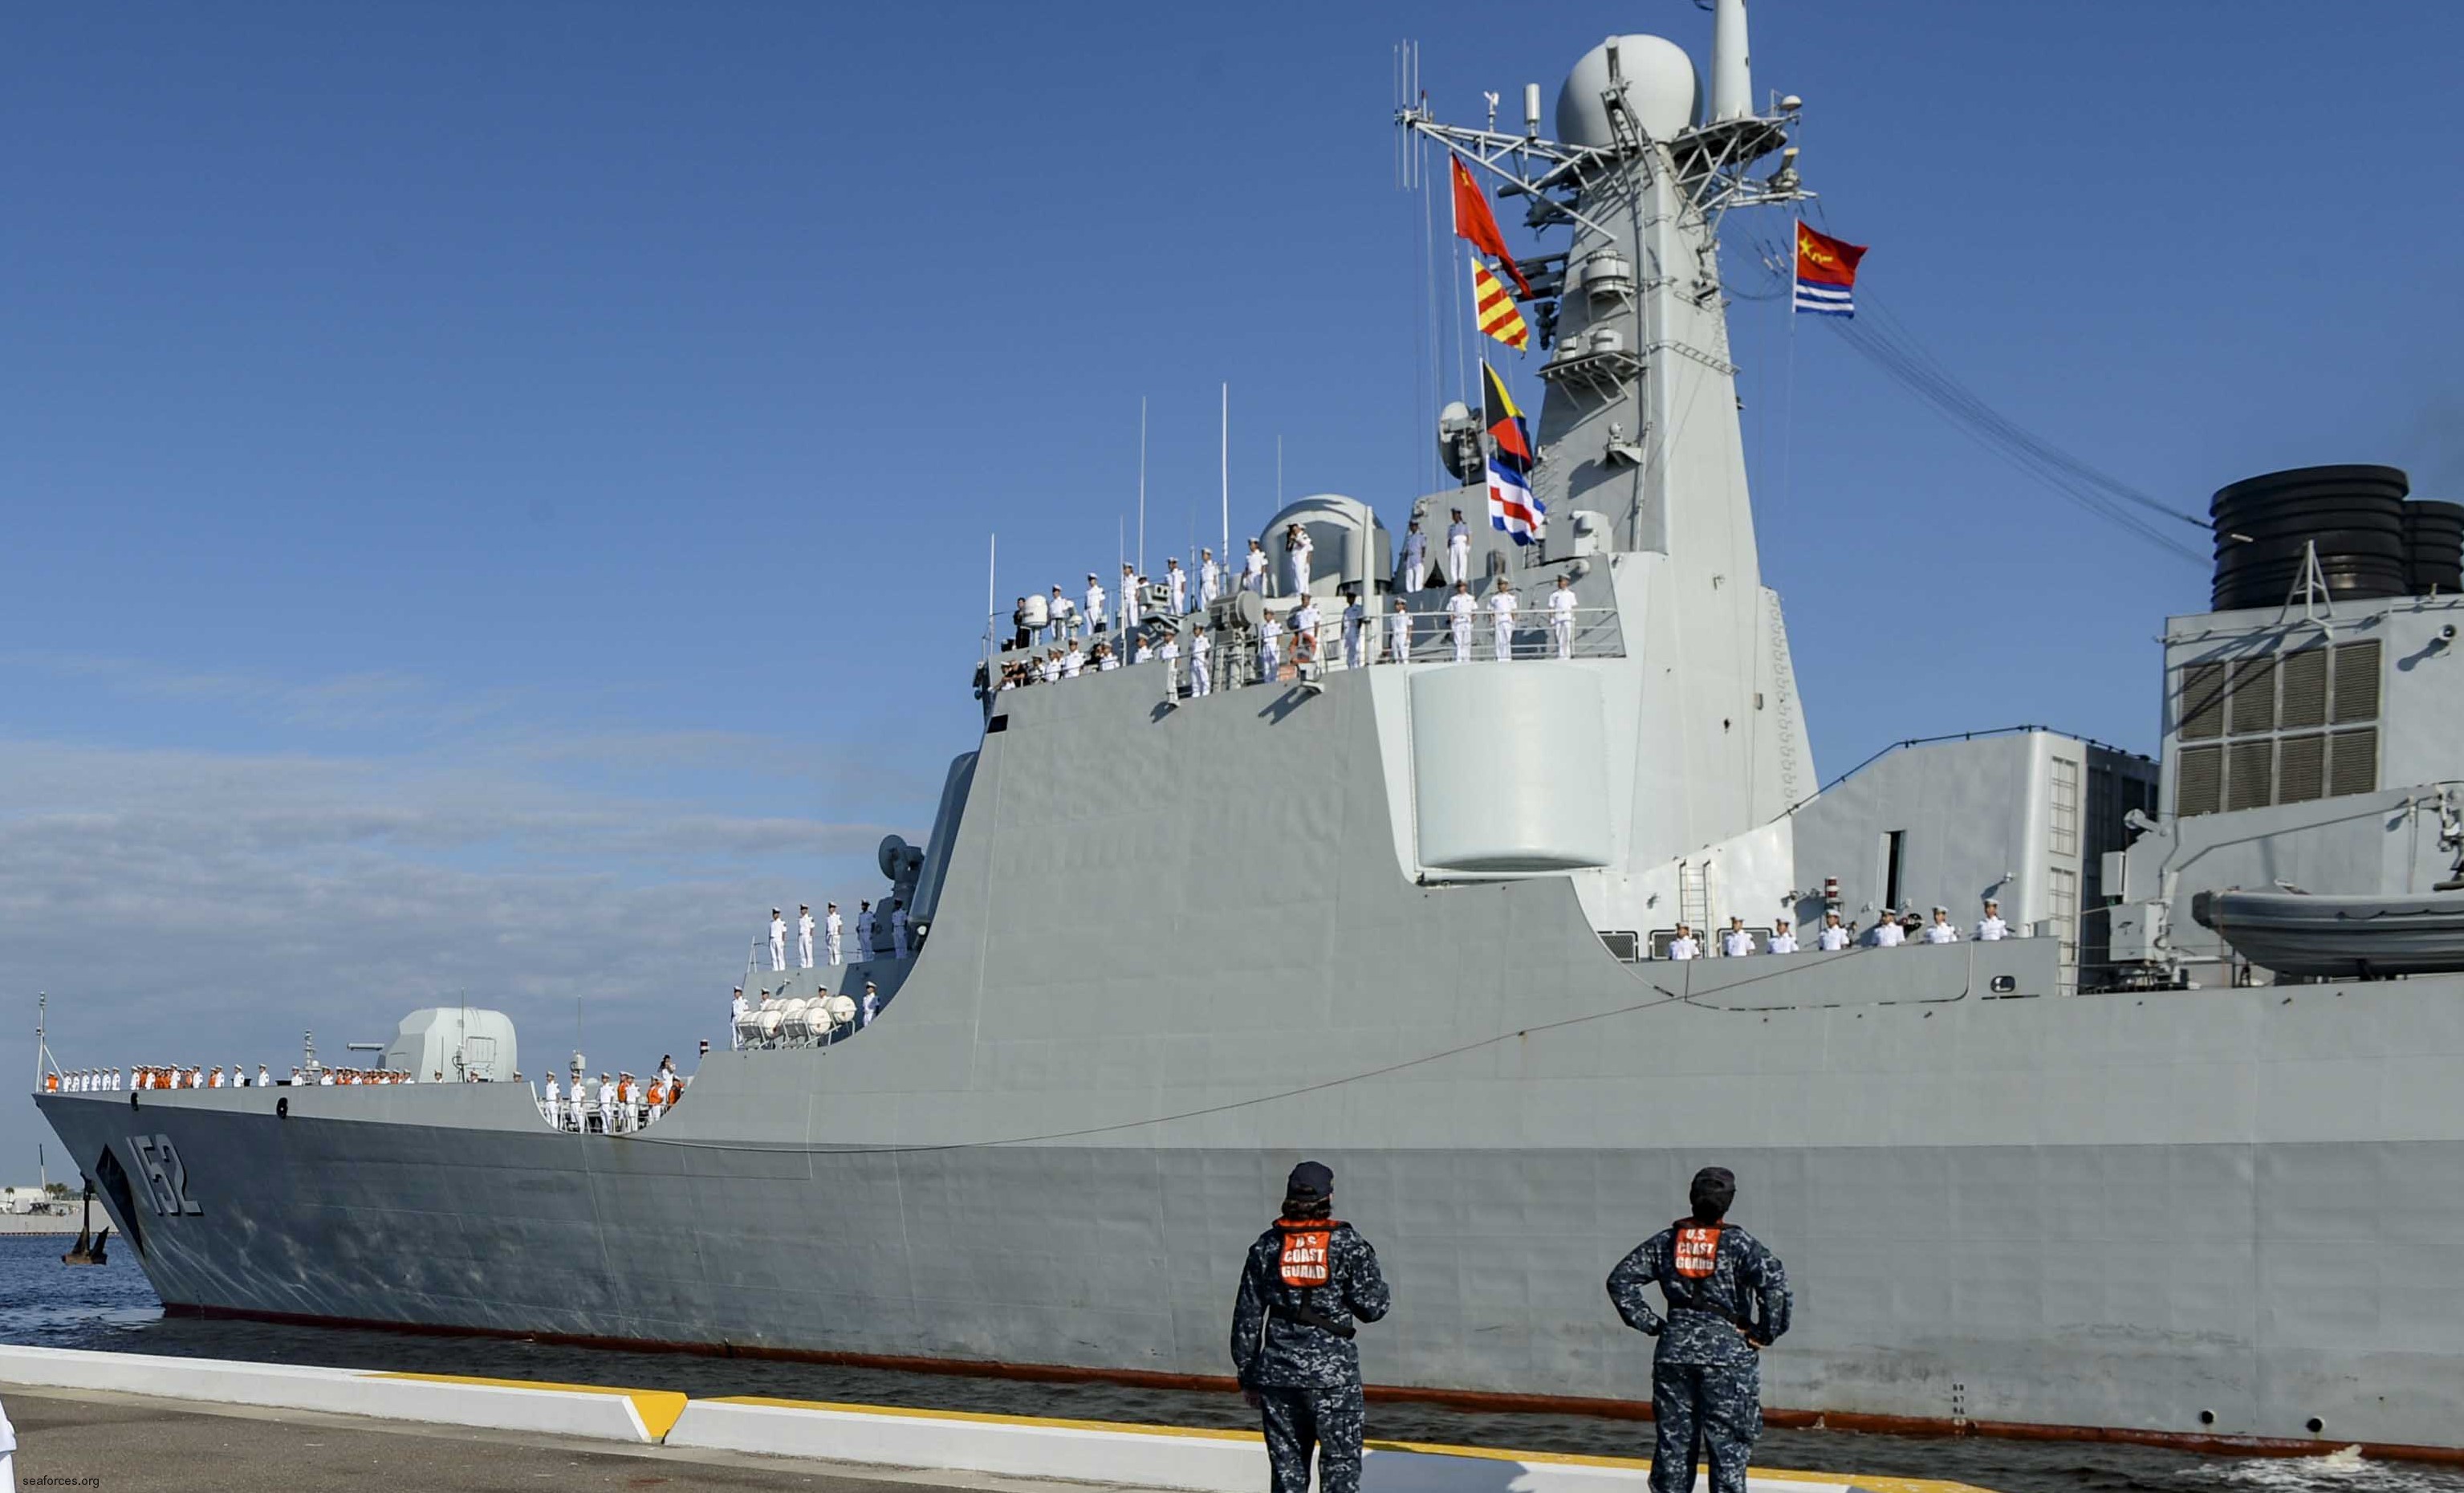 ddg-152 plans jinan type 052c class guided missile destroyer china people's liberation army navy 08